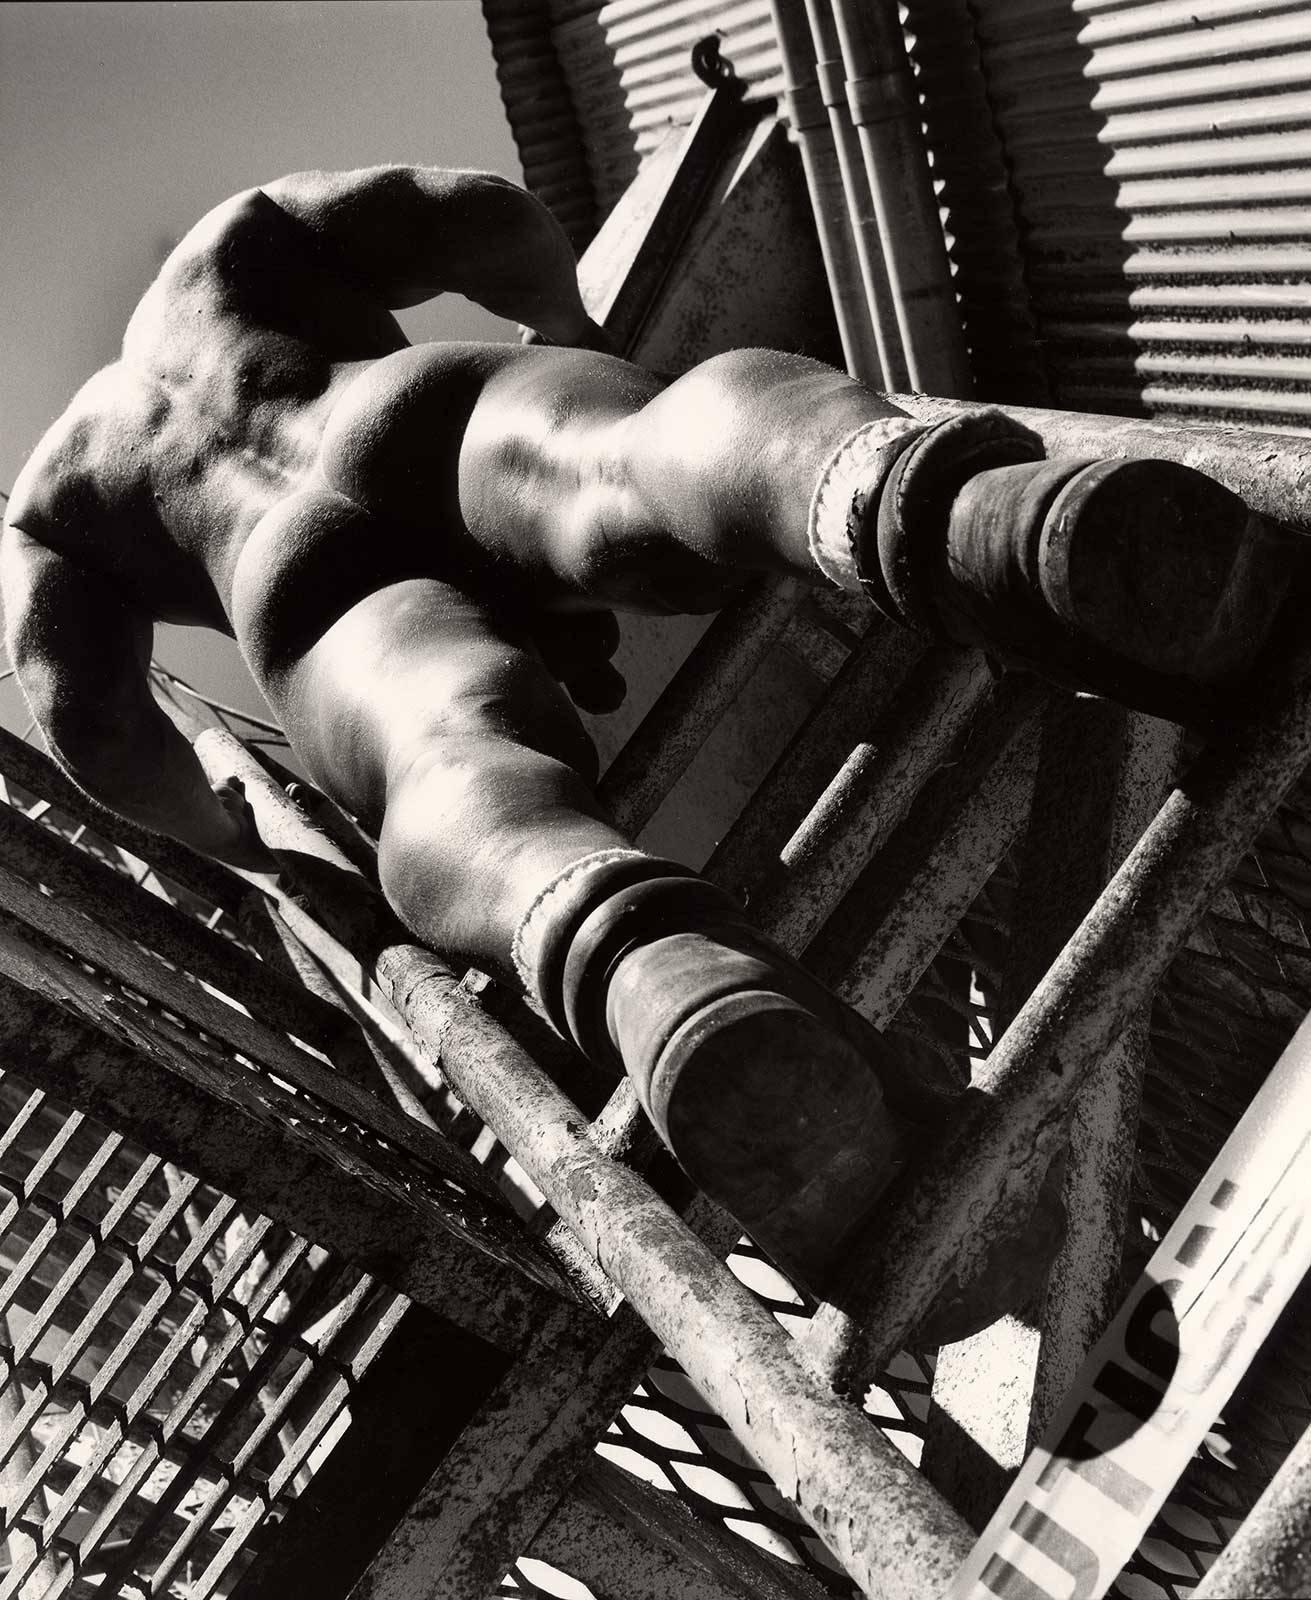 Arthur Tress Figurative Photograph - Caution: Man at Work (Nude construction worker clad only in boots climbs ladder)